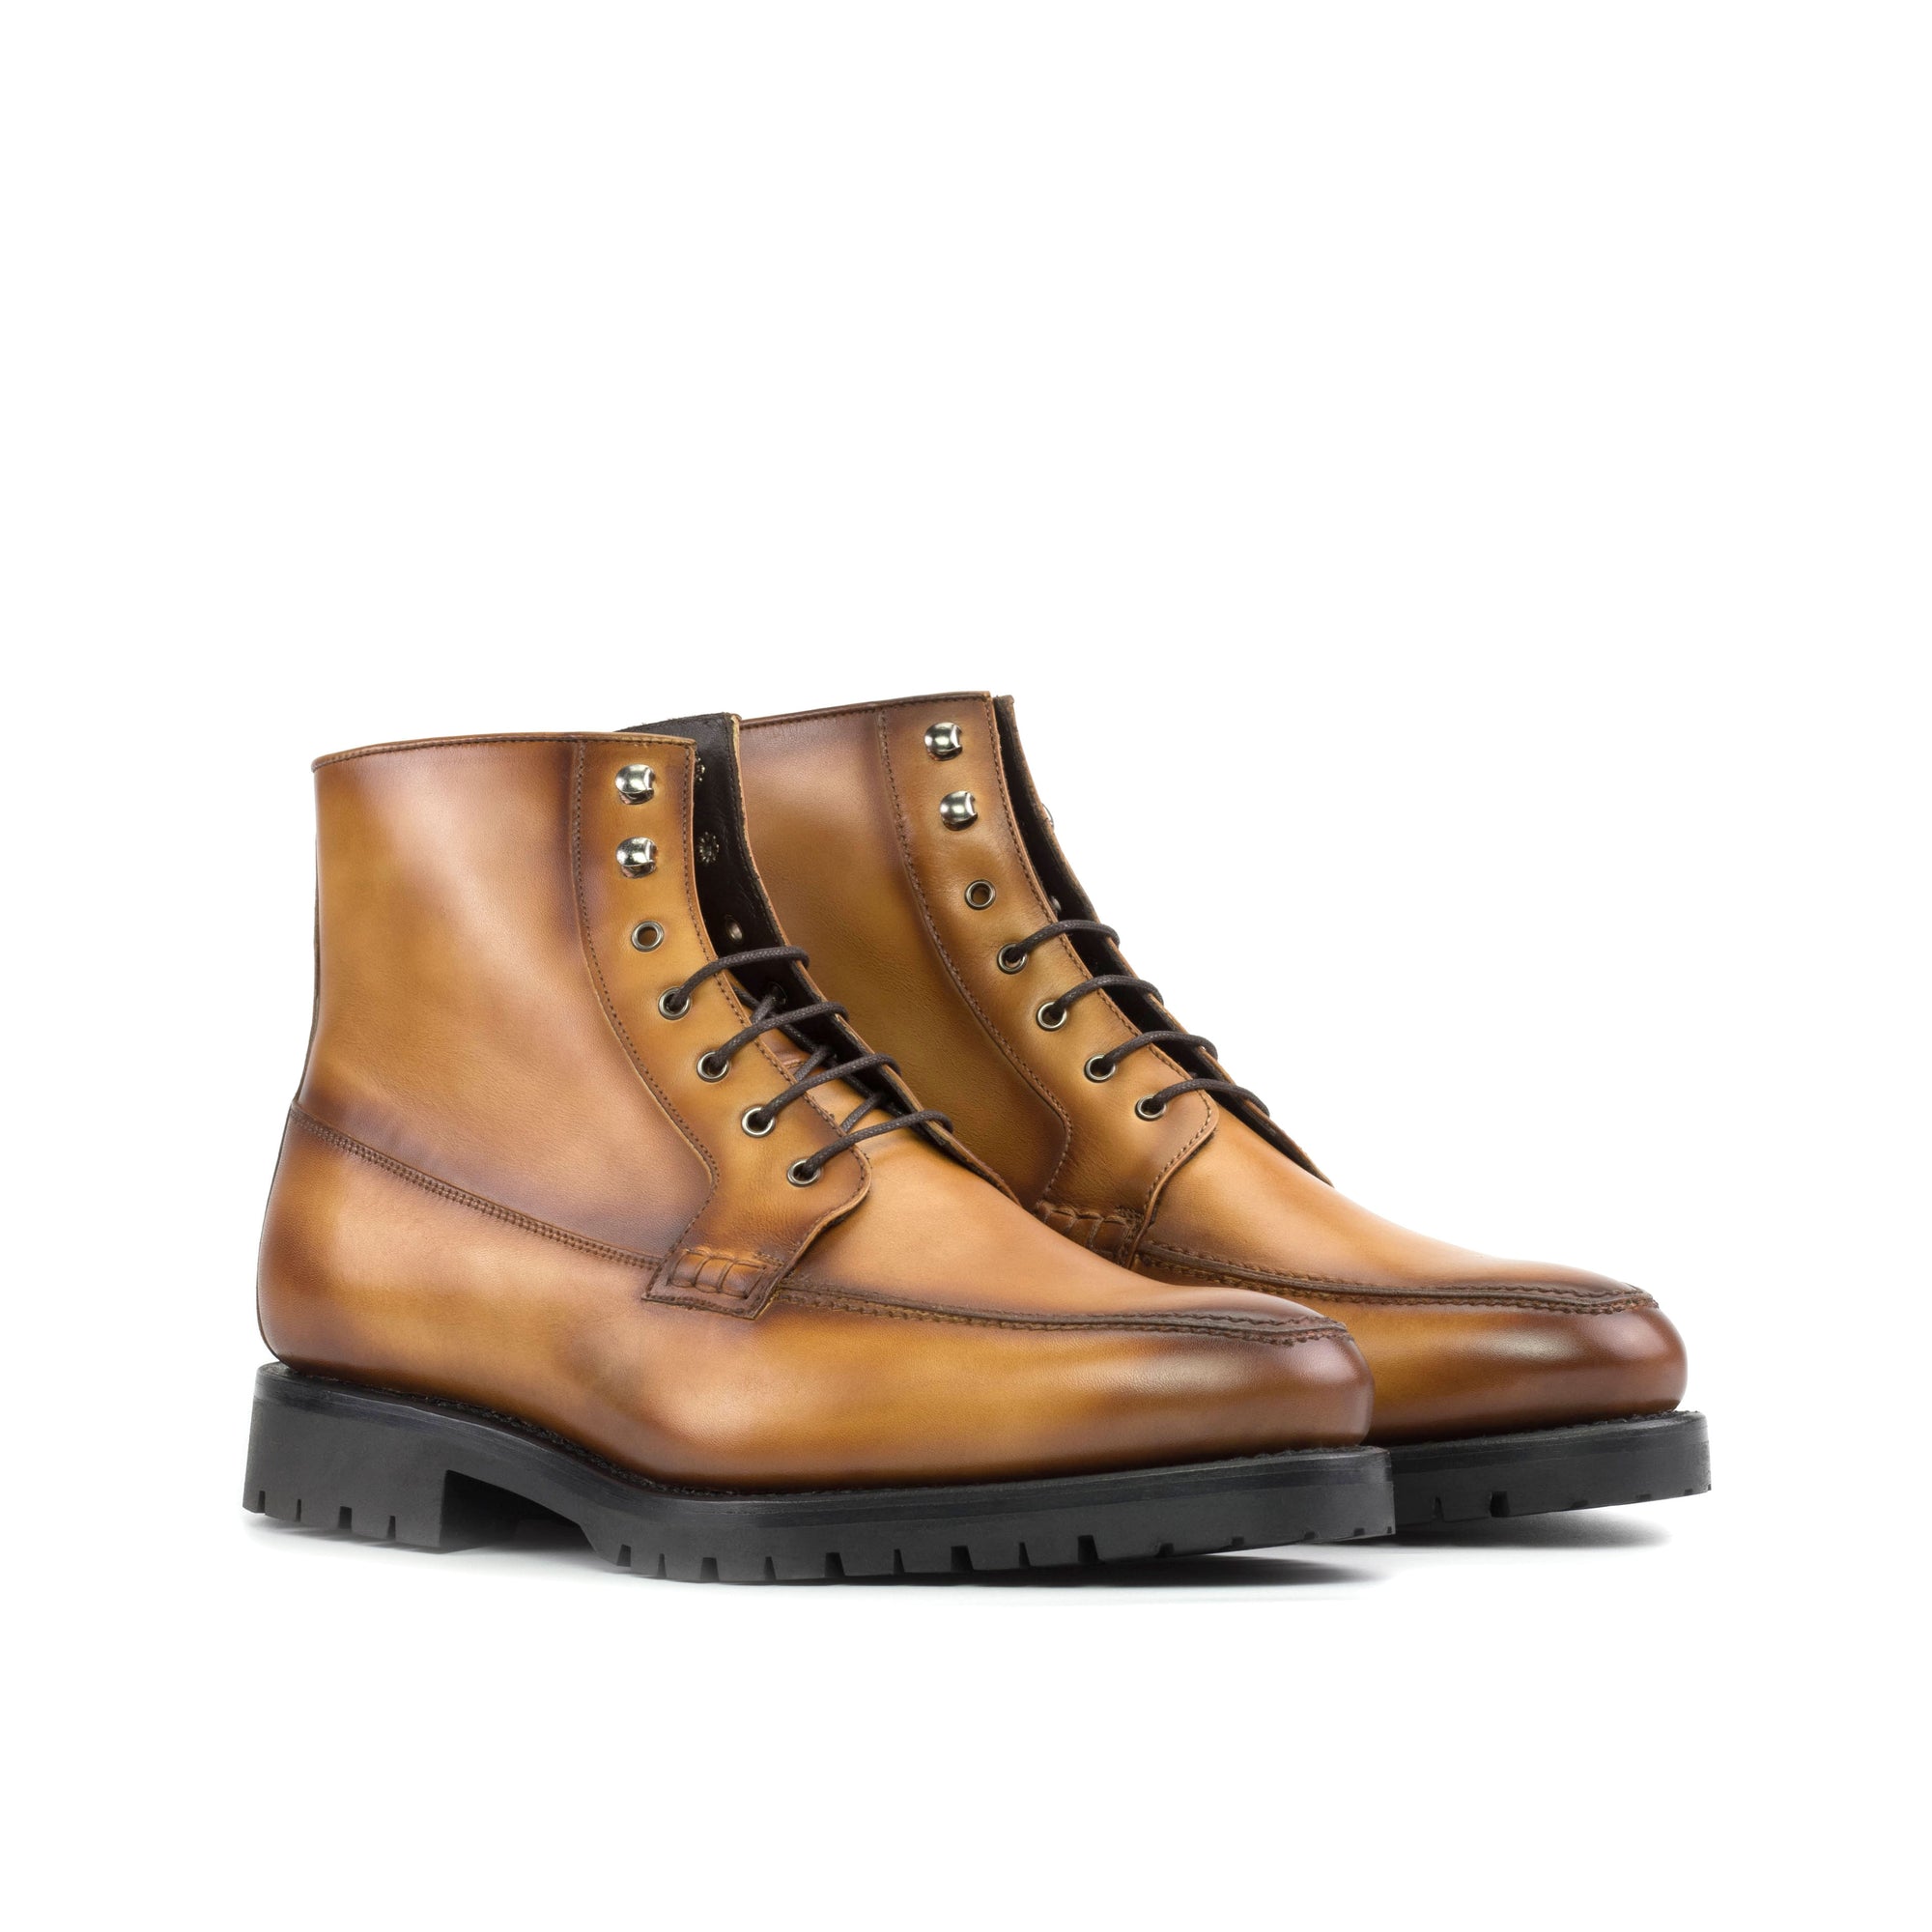 Moc Toe Boot in Cognac Coloured Leather